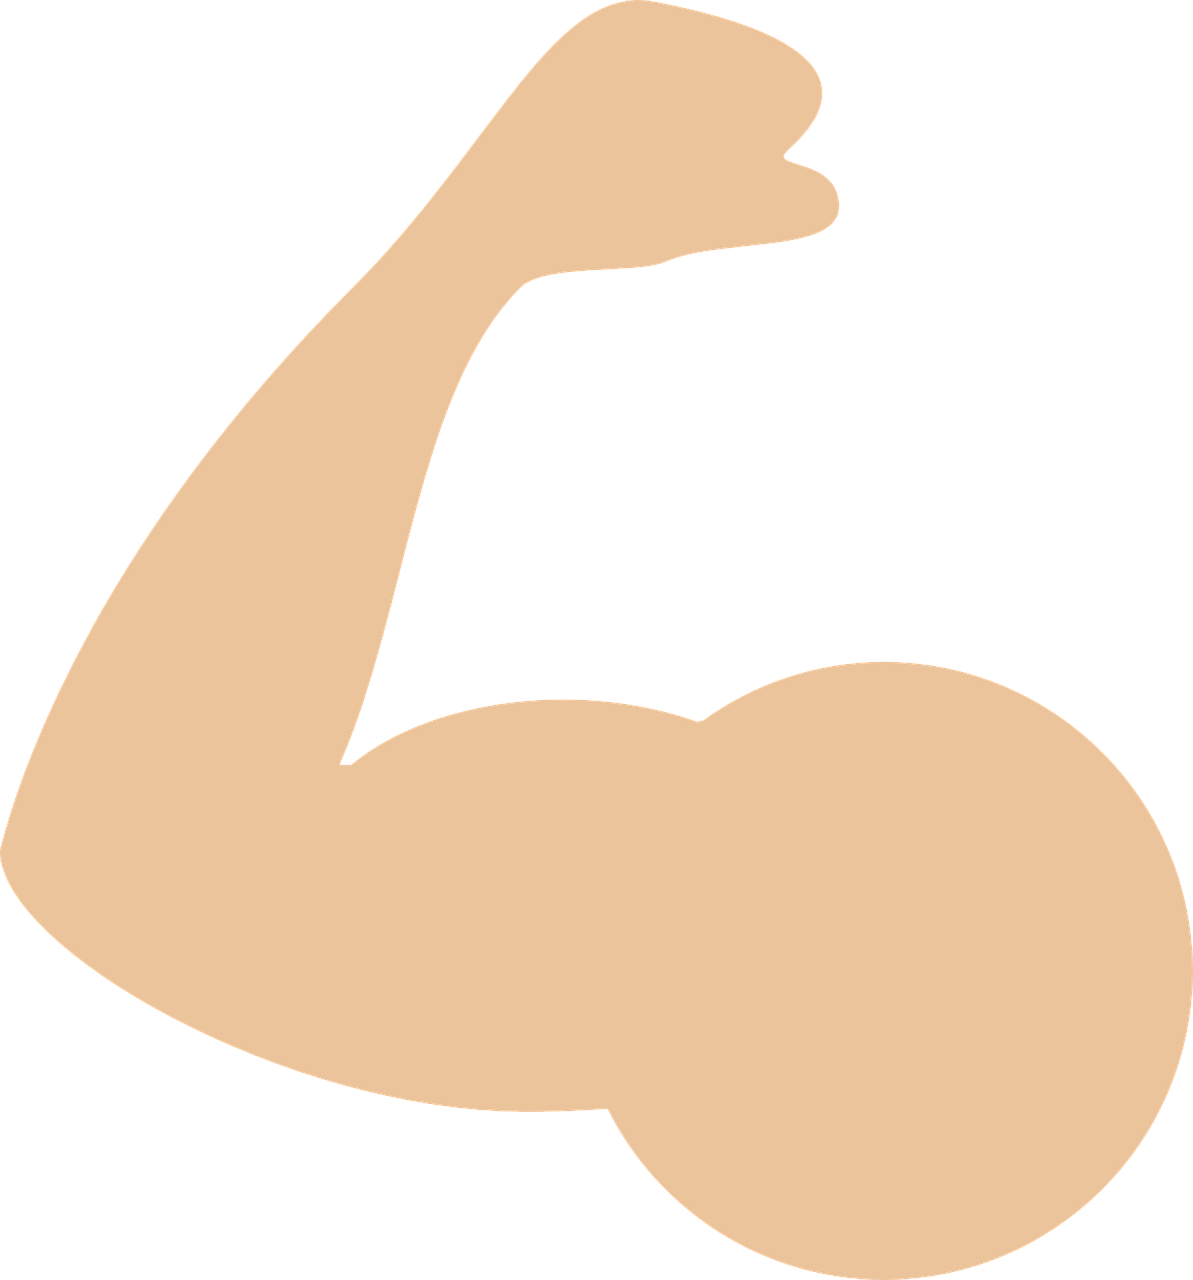 Strong arm (illustration)